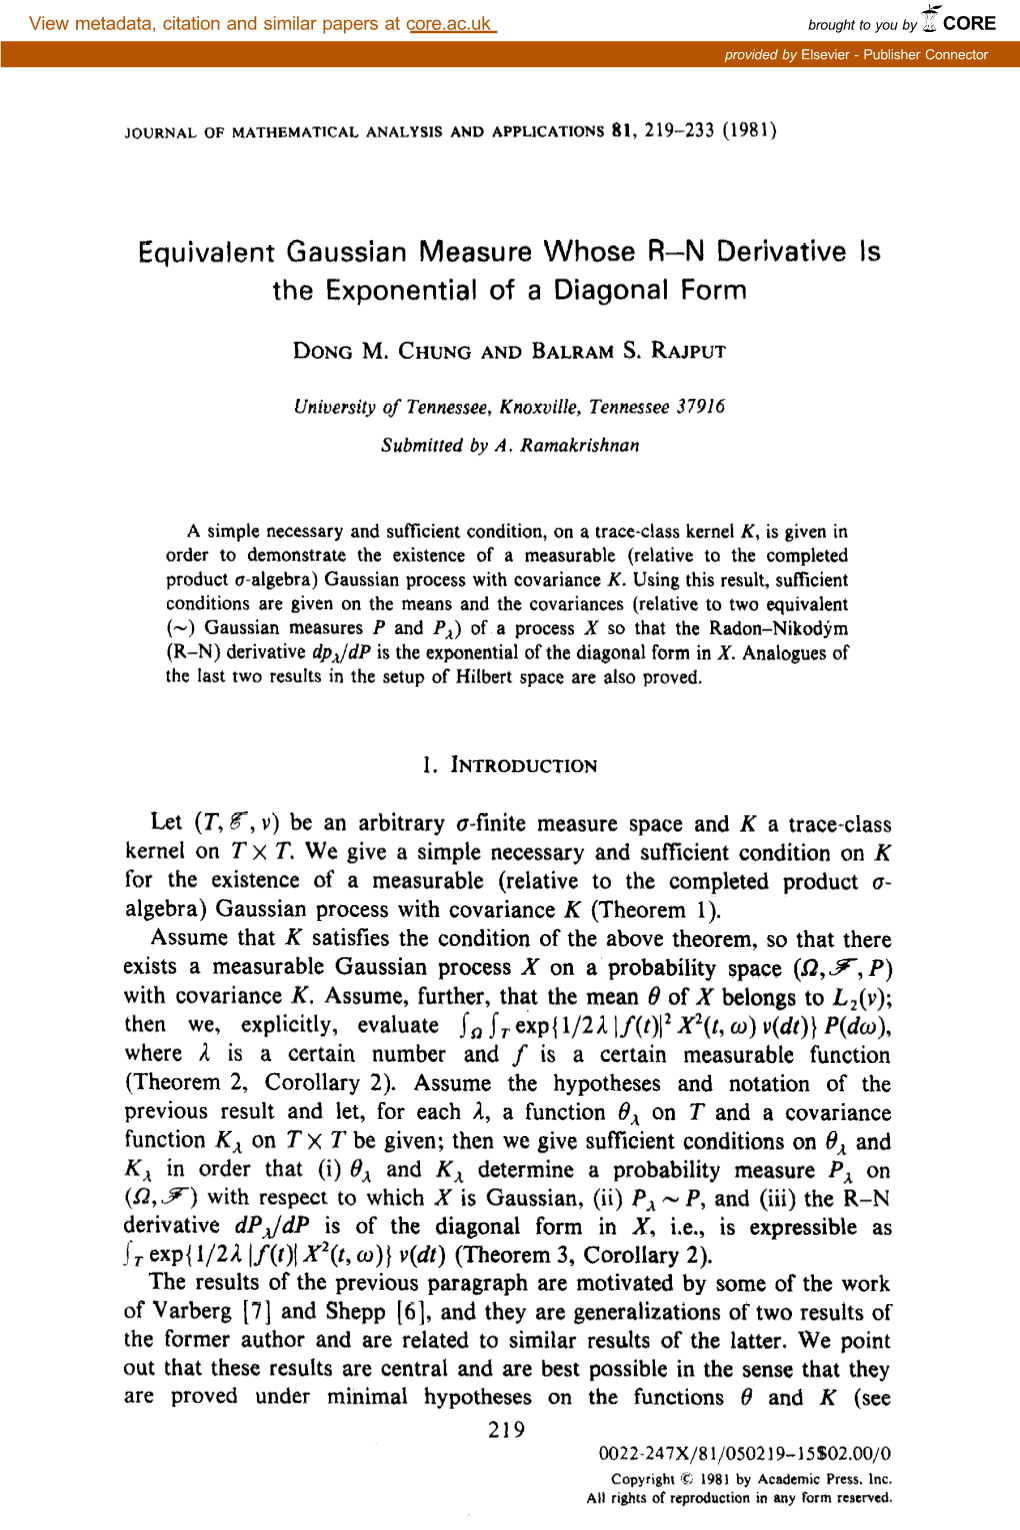 Equivalent Gaussian Measure Whose R-N Derivative Is the Exponential of a Diagonal Form